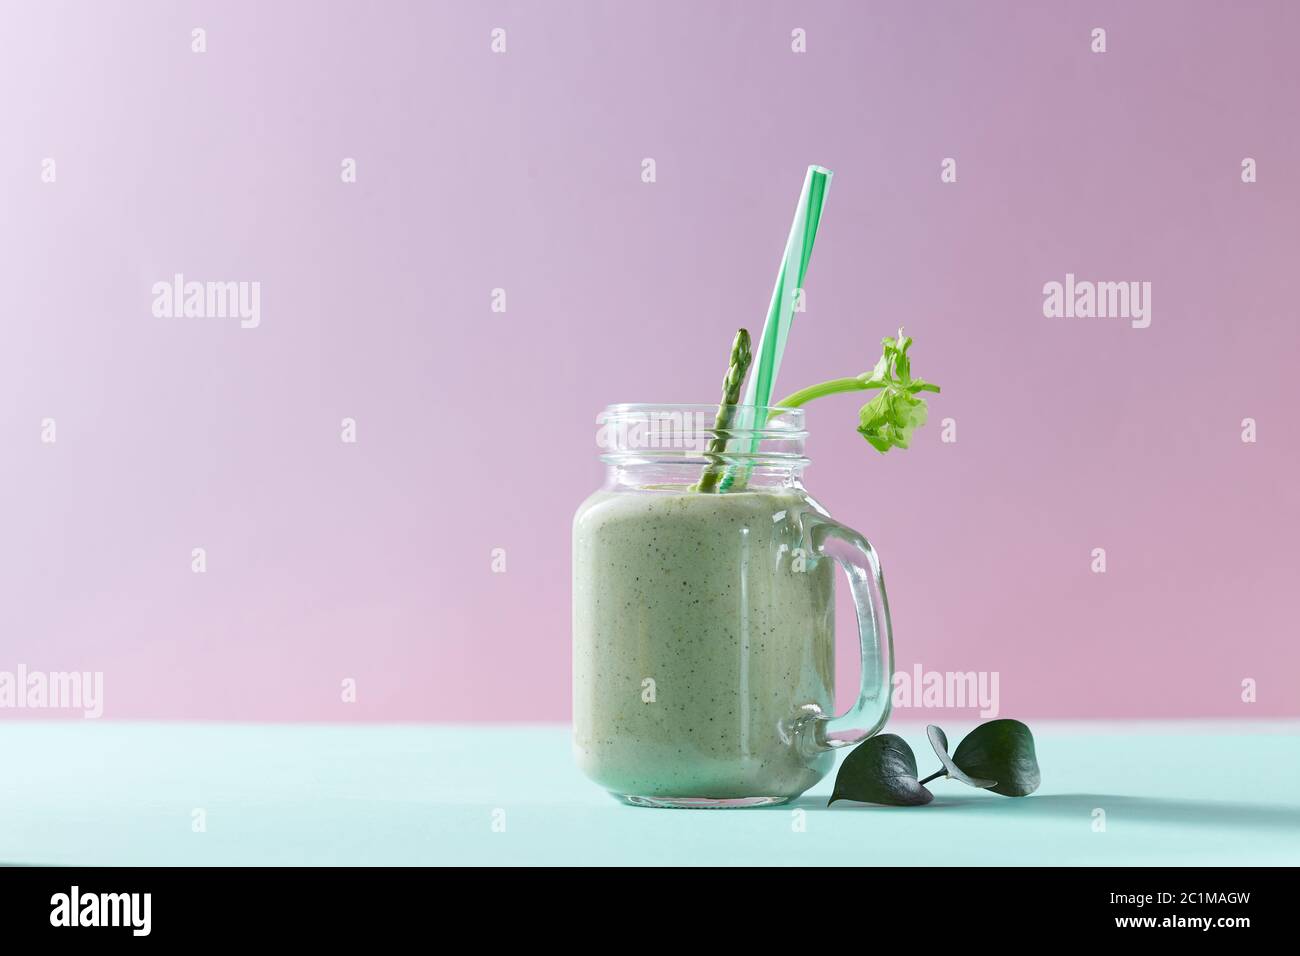 Green smoothie from green organic vegetables with asparagus and celery in a glass bowl on duotone pink green paper background. Stock Photo